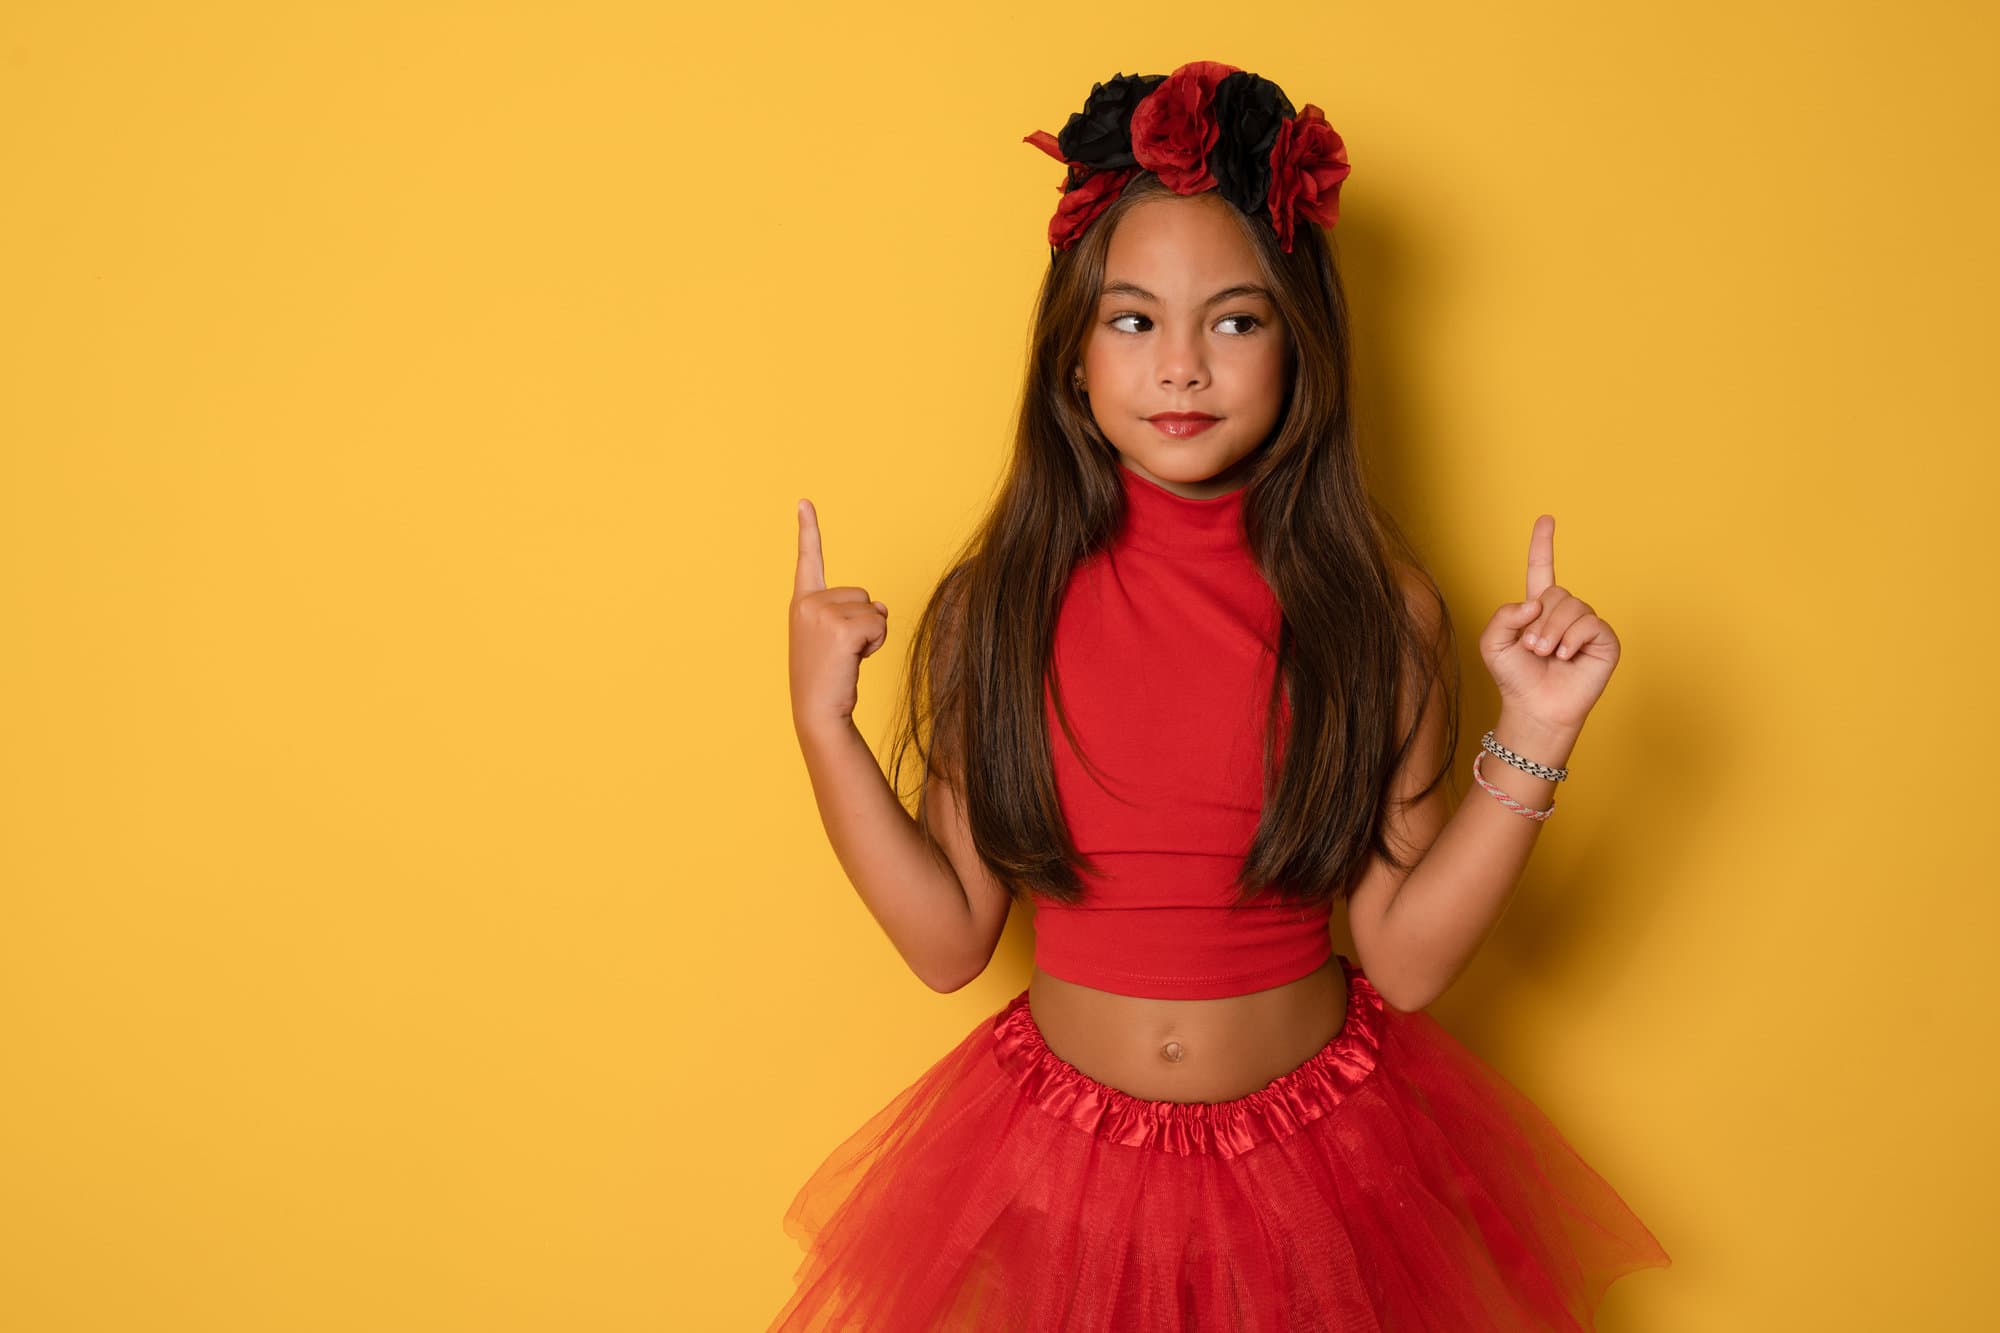 Cute smiling little kid girl in red halloween costume pointing finger up over yellow background. Halloween concept.